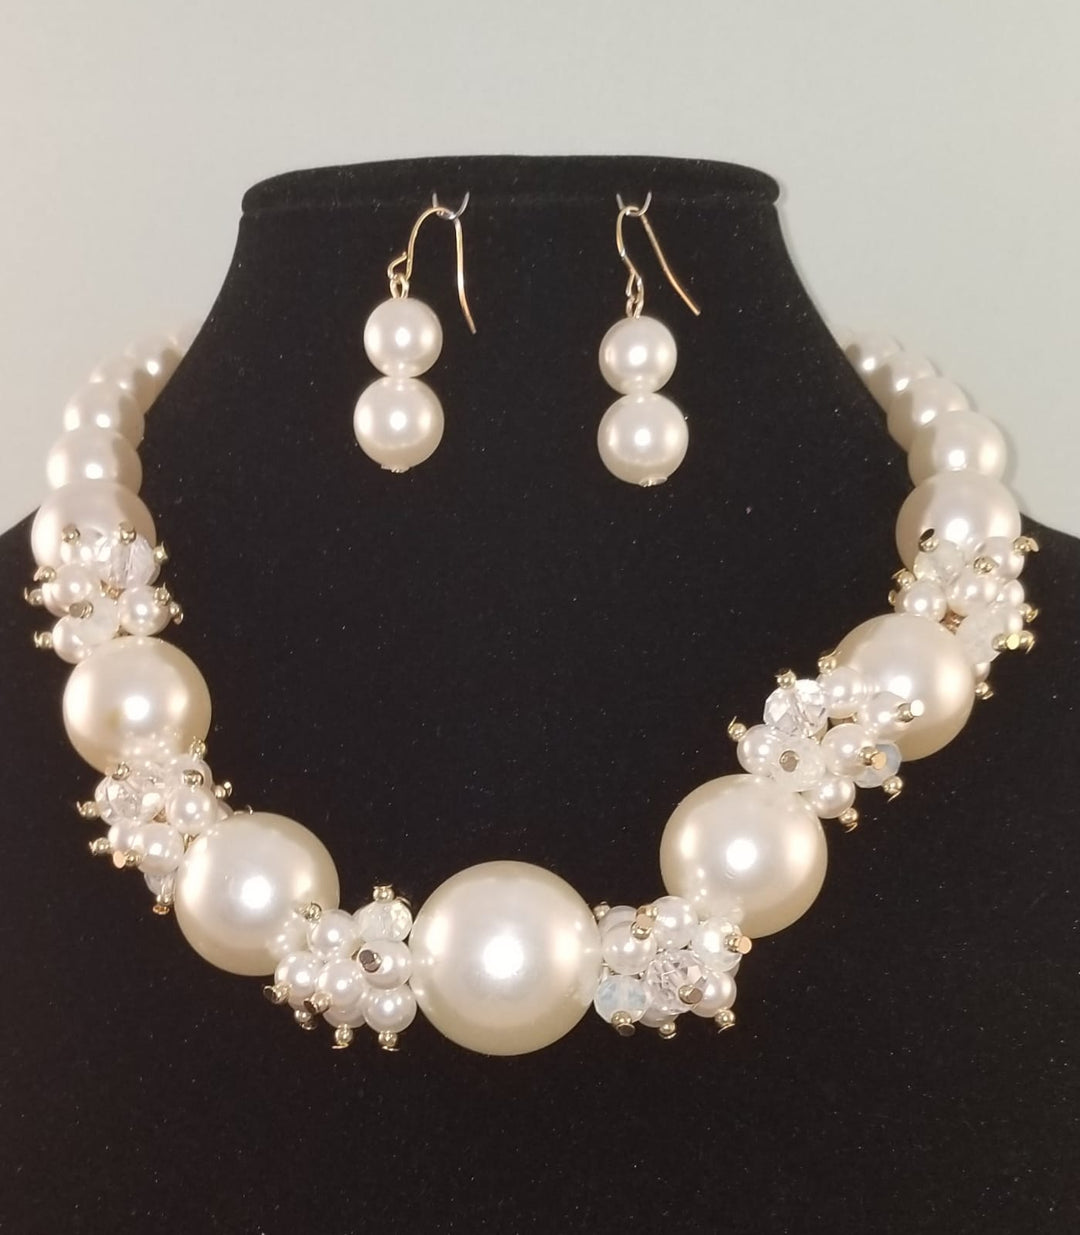 2 pc Pearl Necklace Set